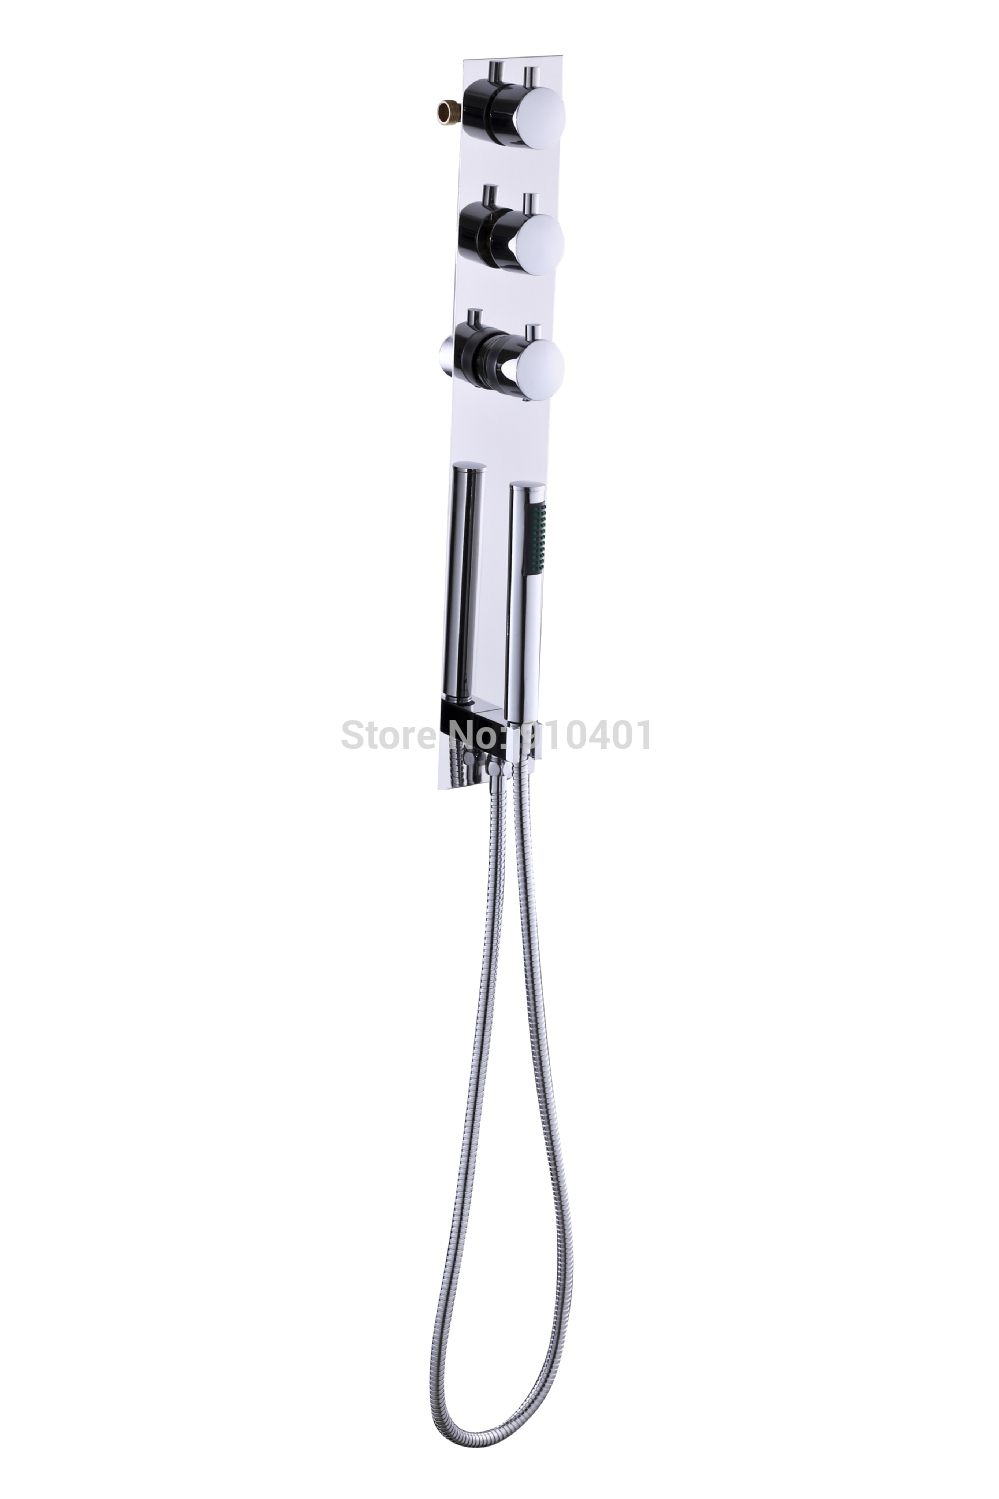 Wholesale And Retail Promotion Large LED 16" Shower Head Thermostatic Valve Mixer Tap Tub Spout W/ Hand Shower